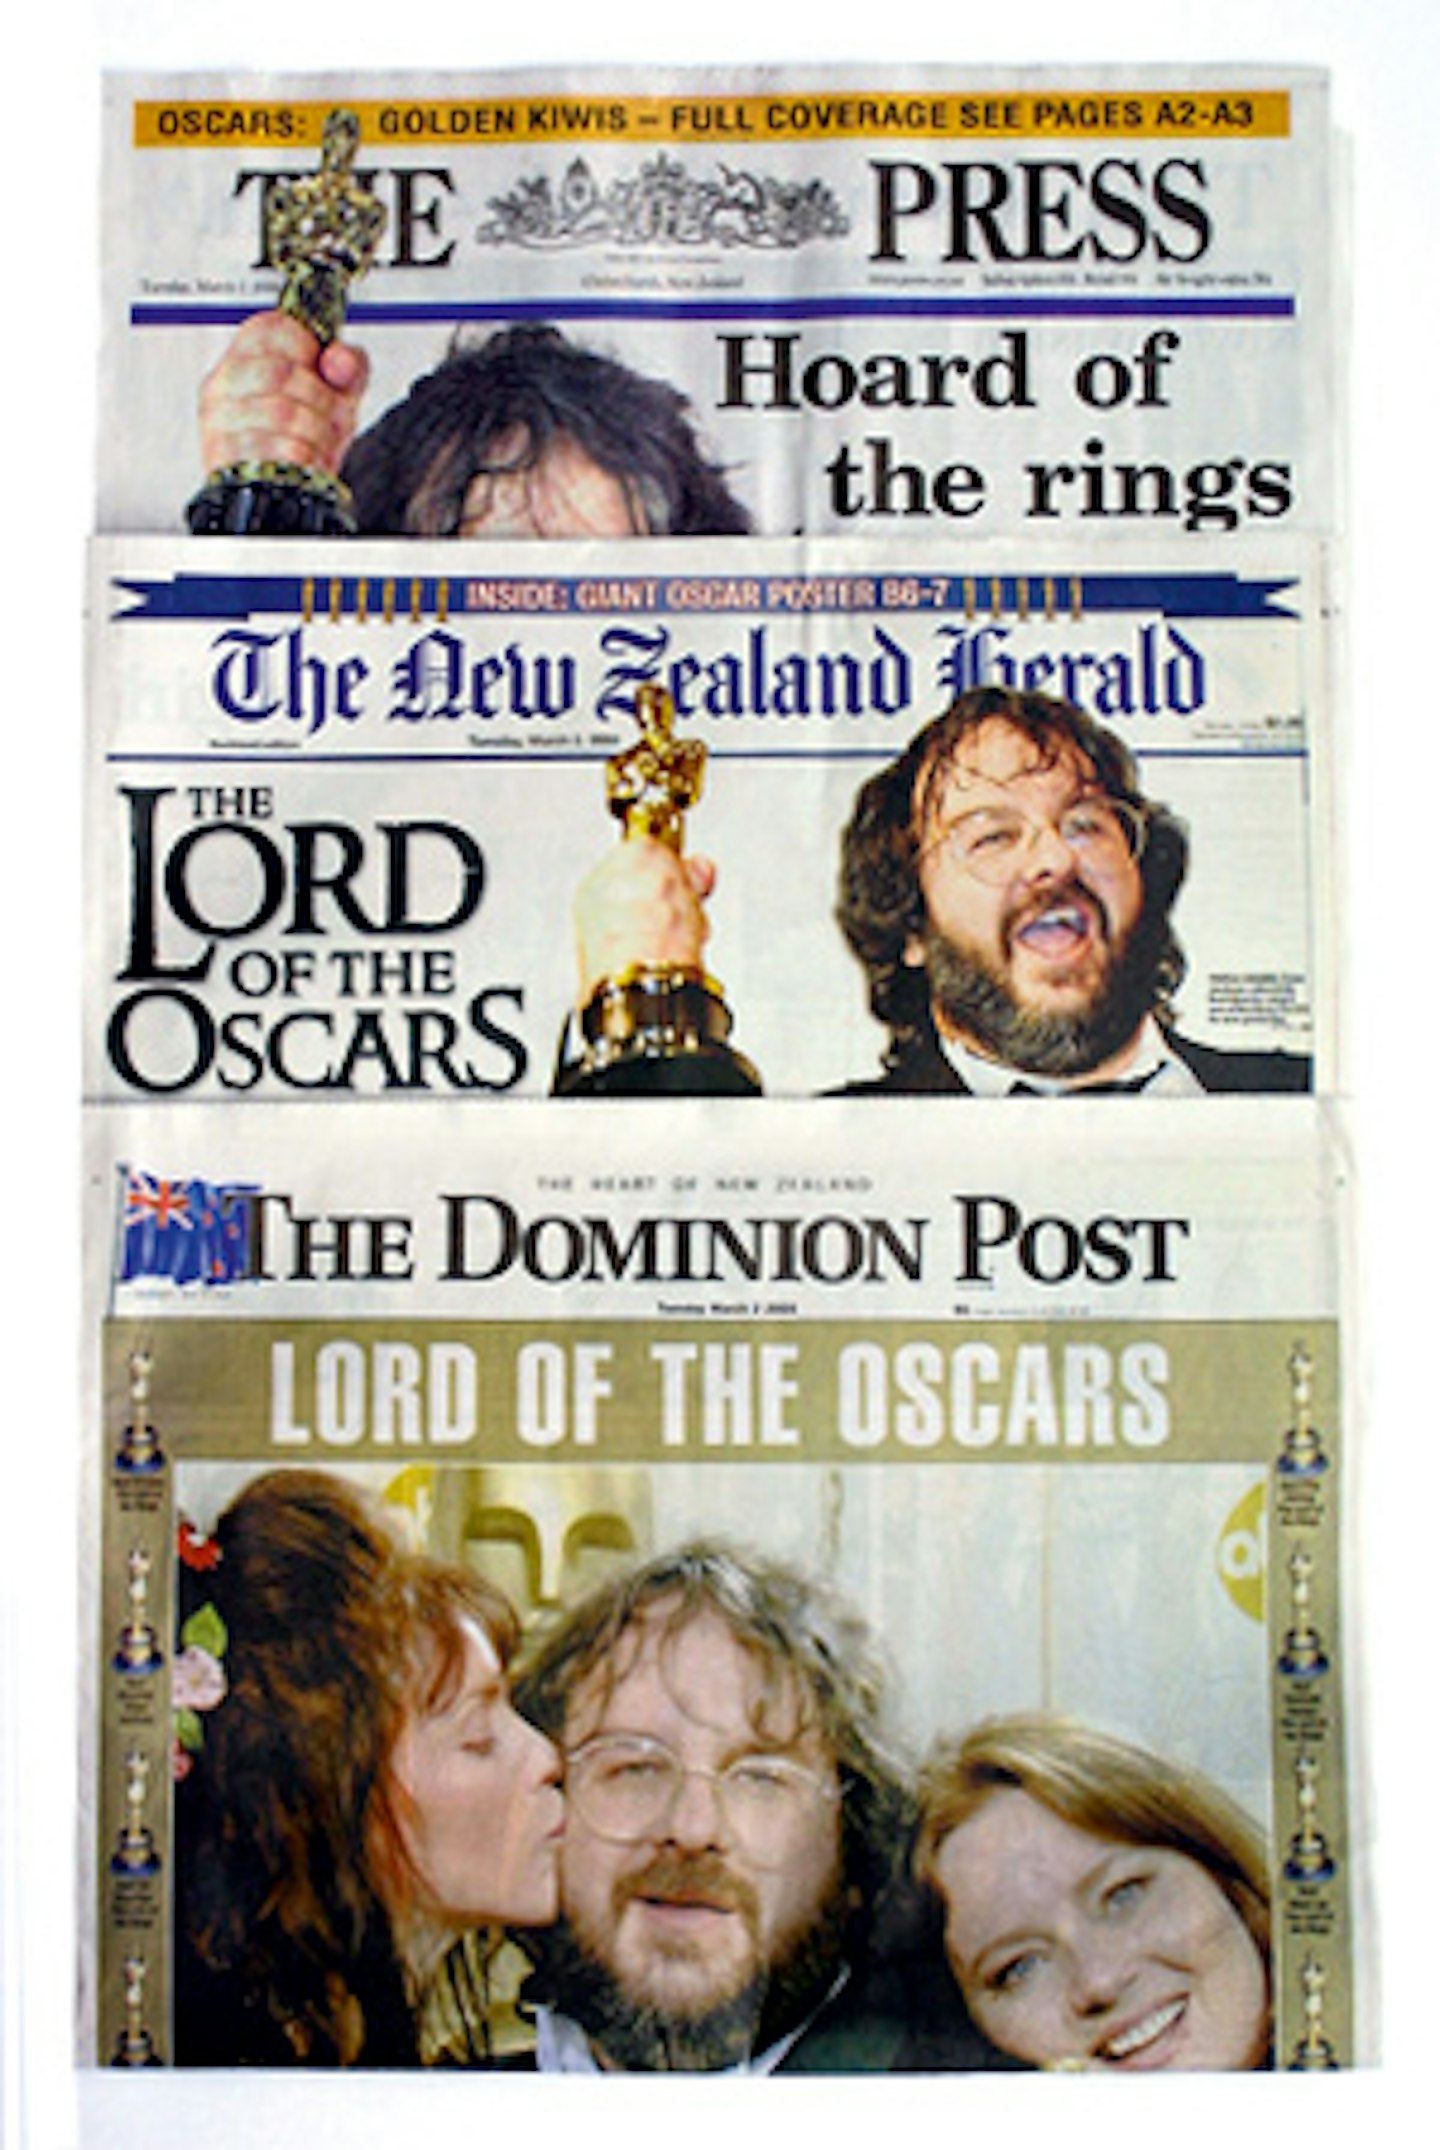 110 days 'til Oscar. More Lord of the Rings? - Blog - The Film Experience